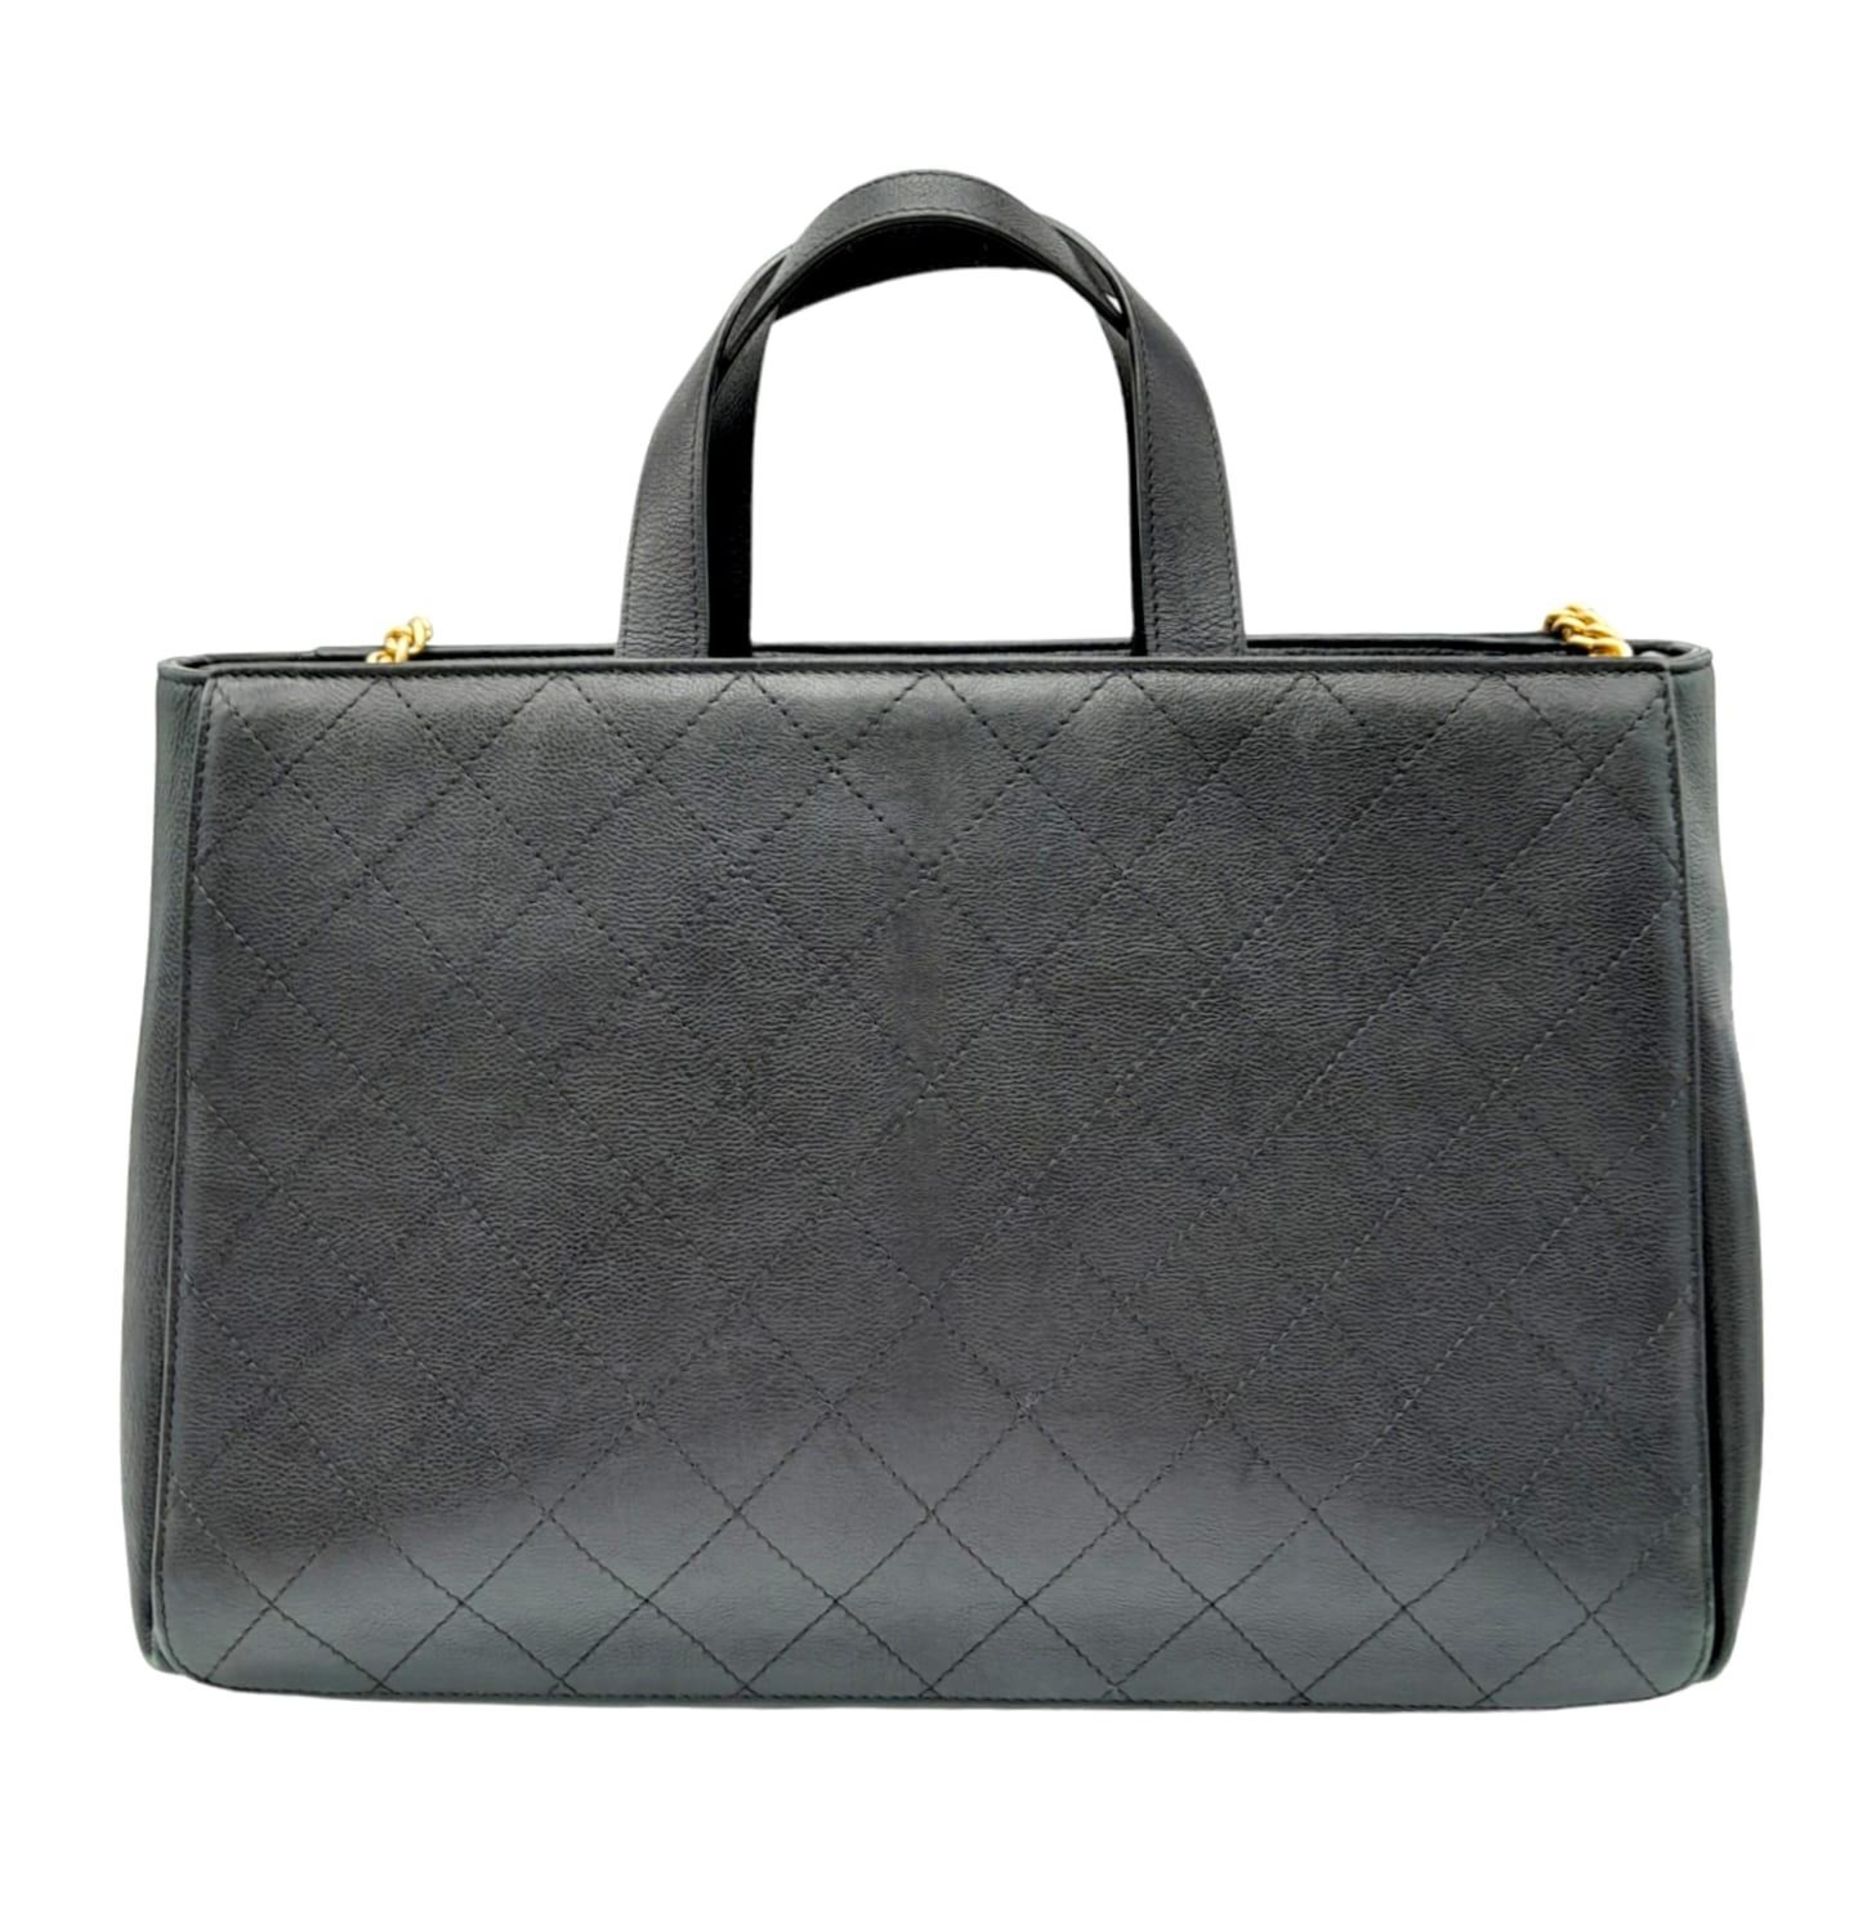 A Chanel black quilted caviar leather straight line tote bag. Silver and gold tone hardware, studded - Image 3 of 9